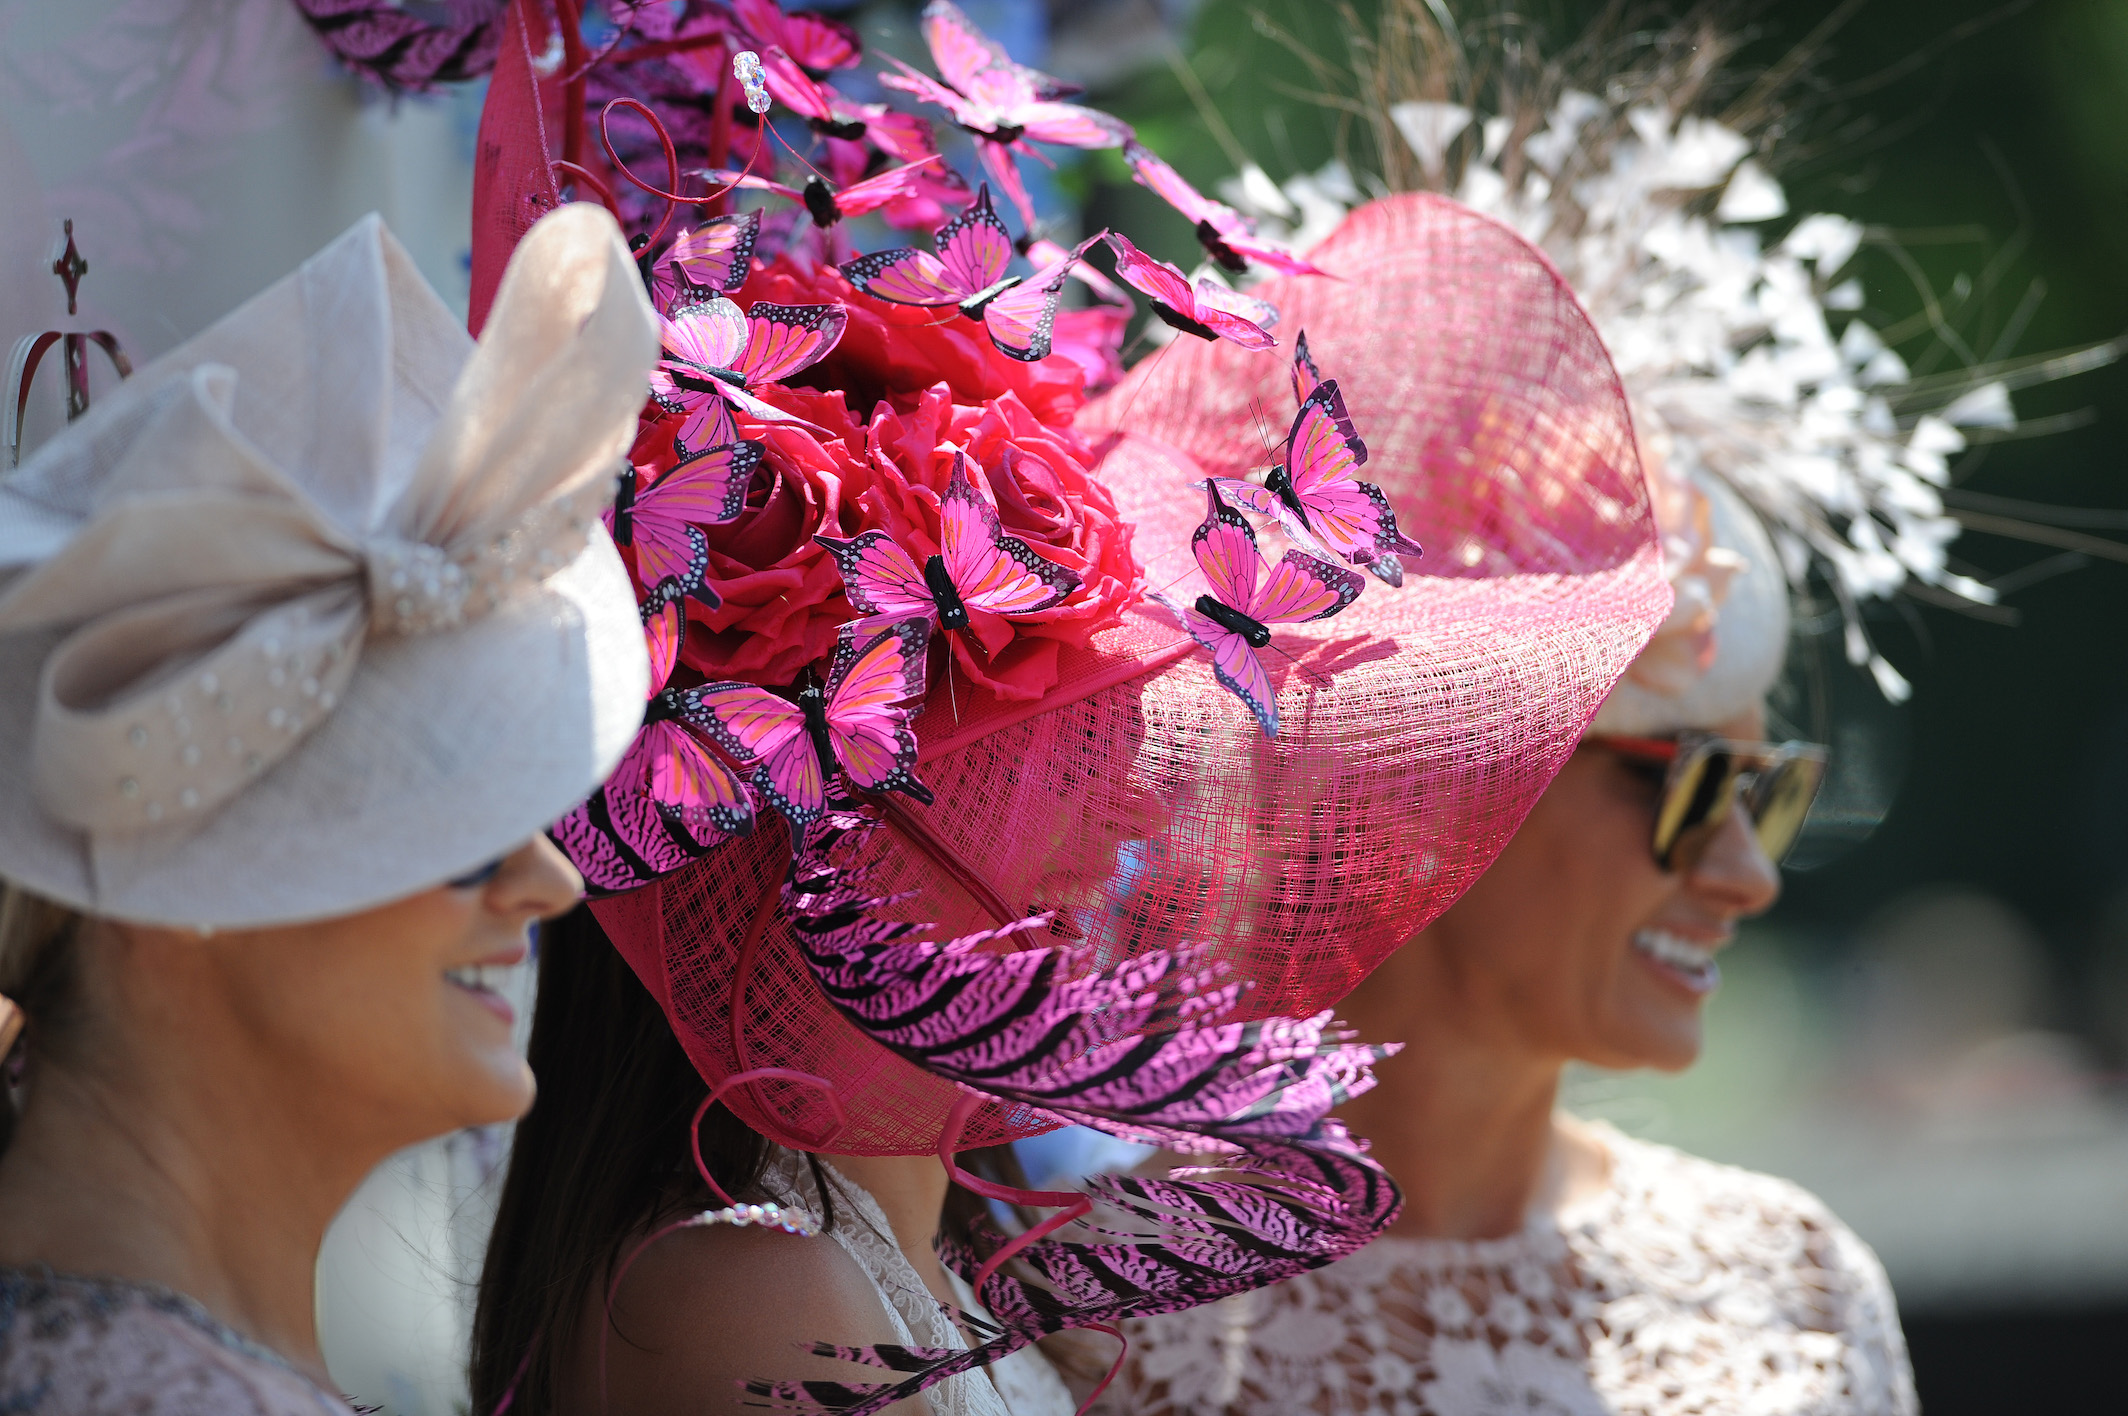 A recent economic review conducted by Ascot estimated that over half of the direct spending of racegoers at the royal meeting goes on fashion and related beauty treatments. Photo: Racingfotos.com